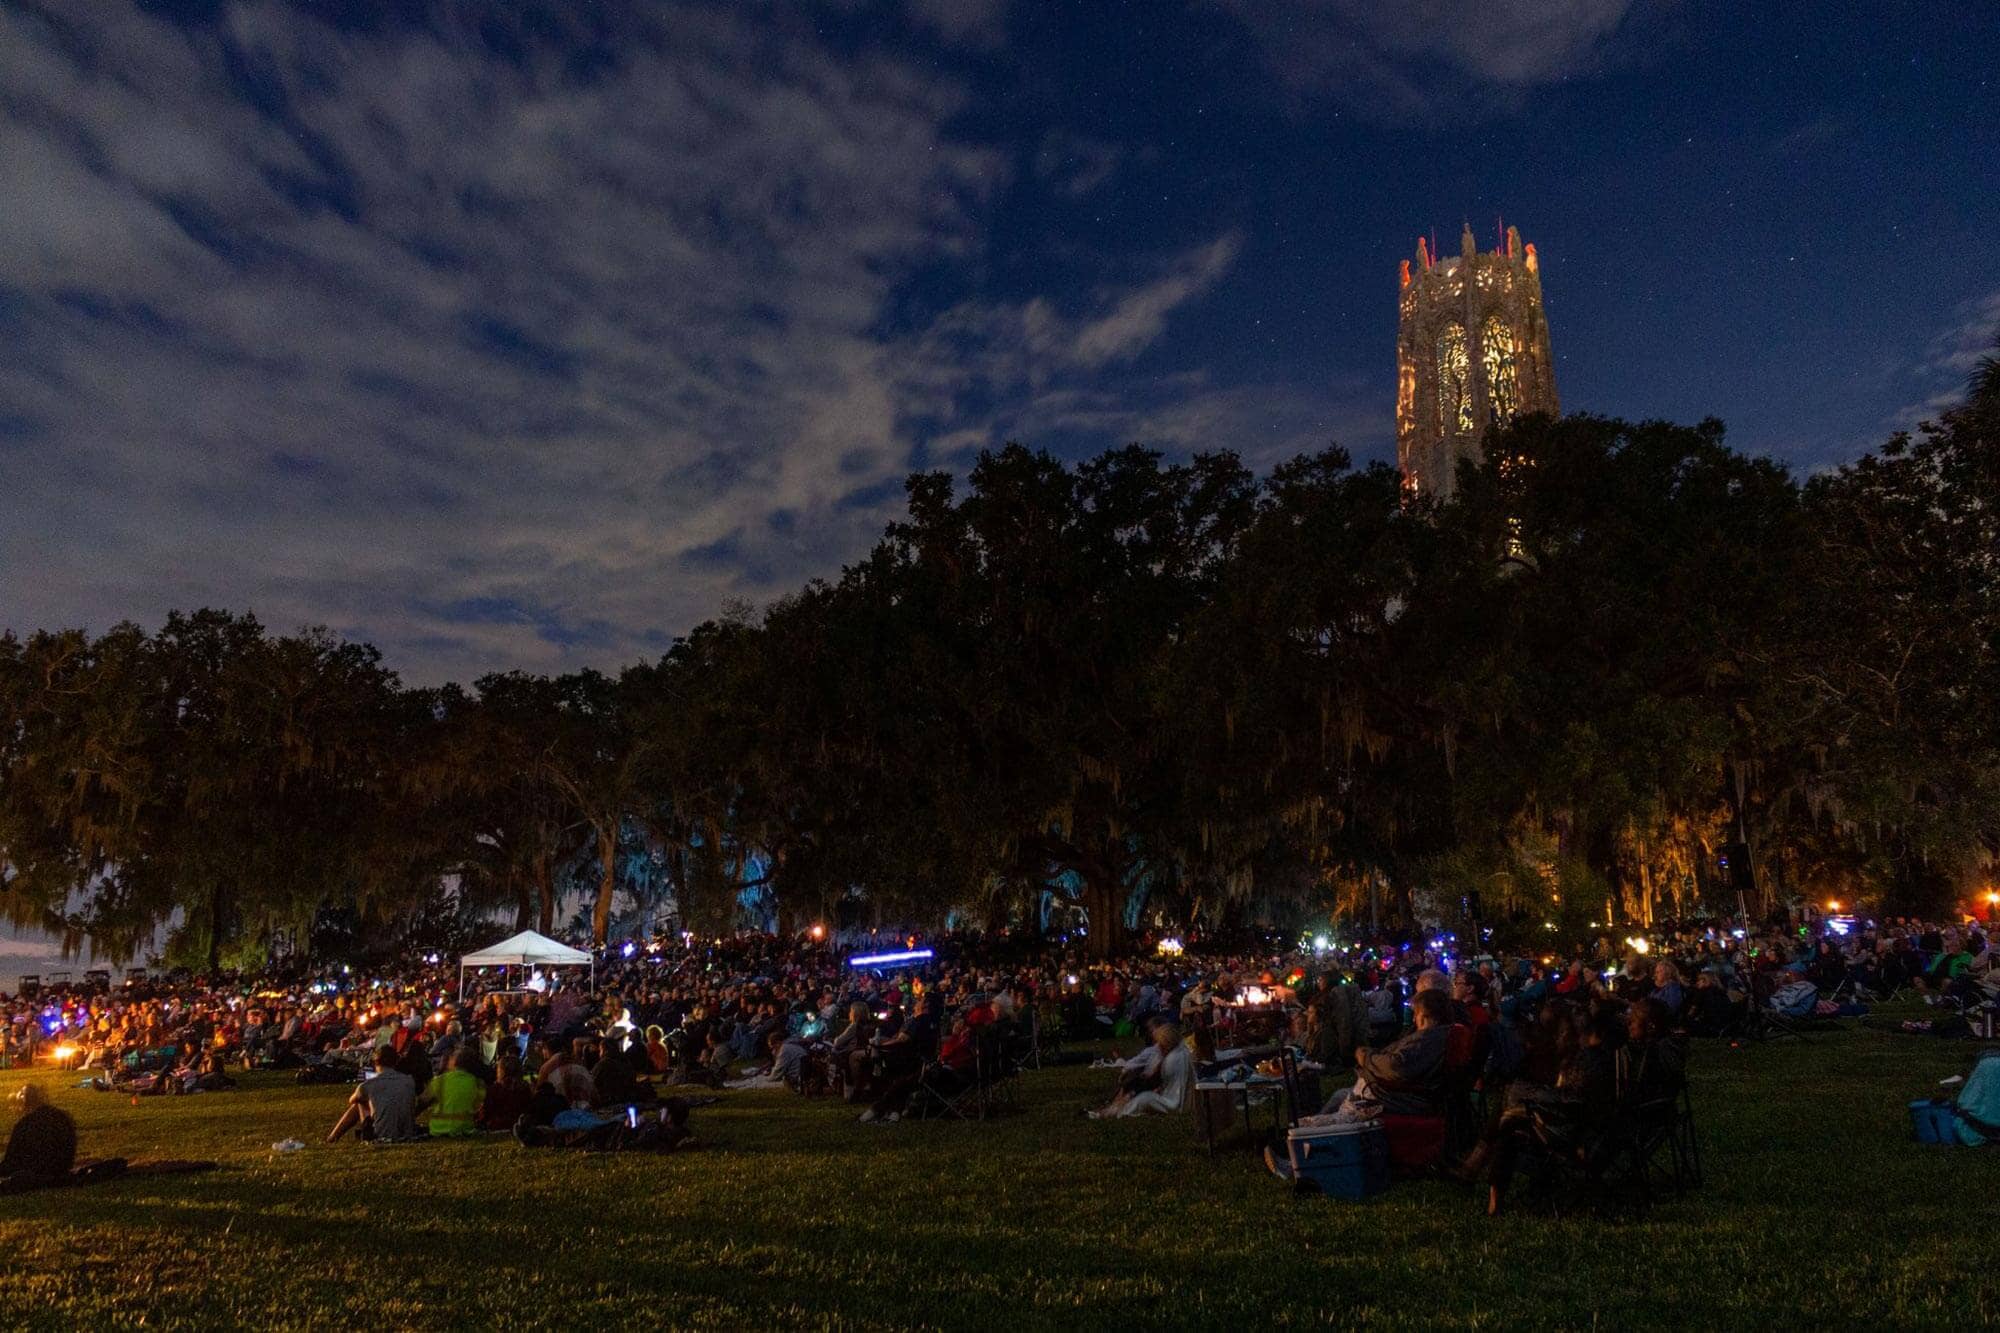 crowd gathered for moonlight concert at Bok Tower Gardens. Carillon tower in background.